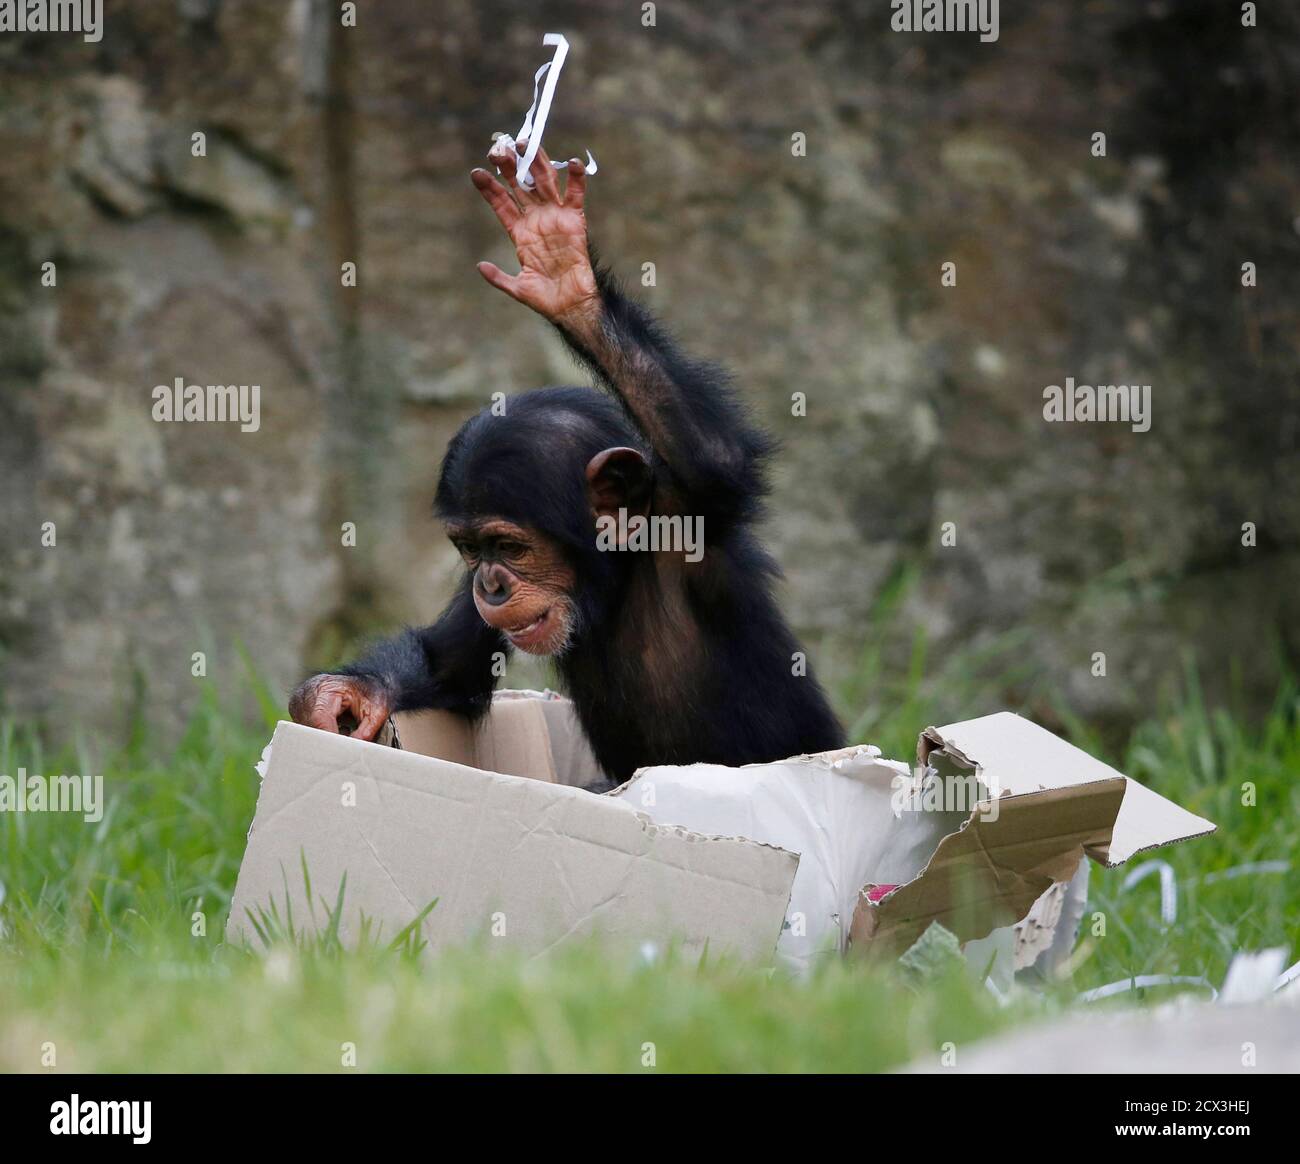 A 13-month-old chimp named Fumo throws shredded paper Christmas wrapping  out of a box which contained food treats, during a Christmas-themed feeding  session at Sydney's Taronga Park Zoo, December 9, 2014. Fumo,